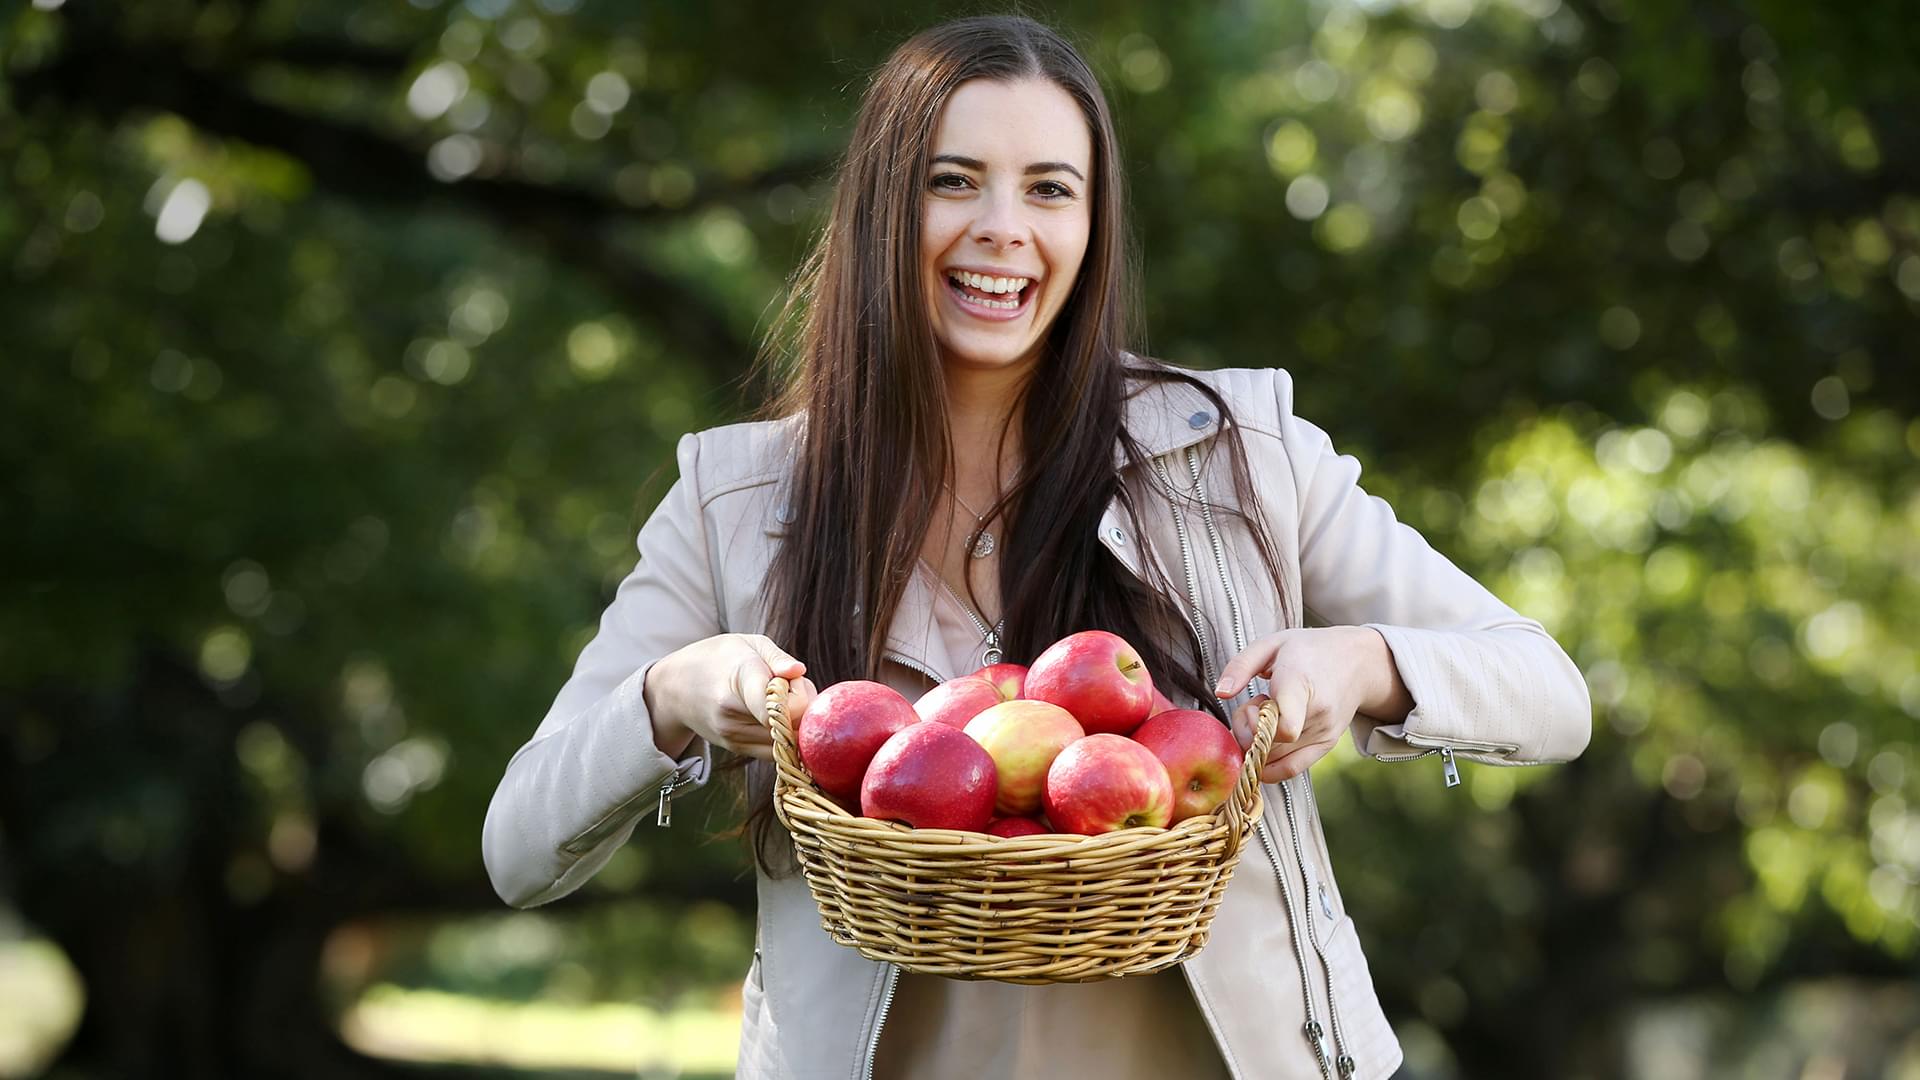 Young woman facing camera and holding a basket of apples